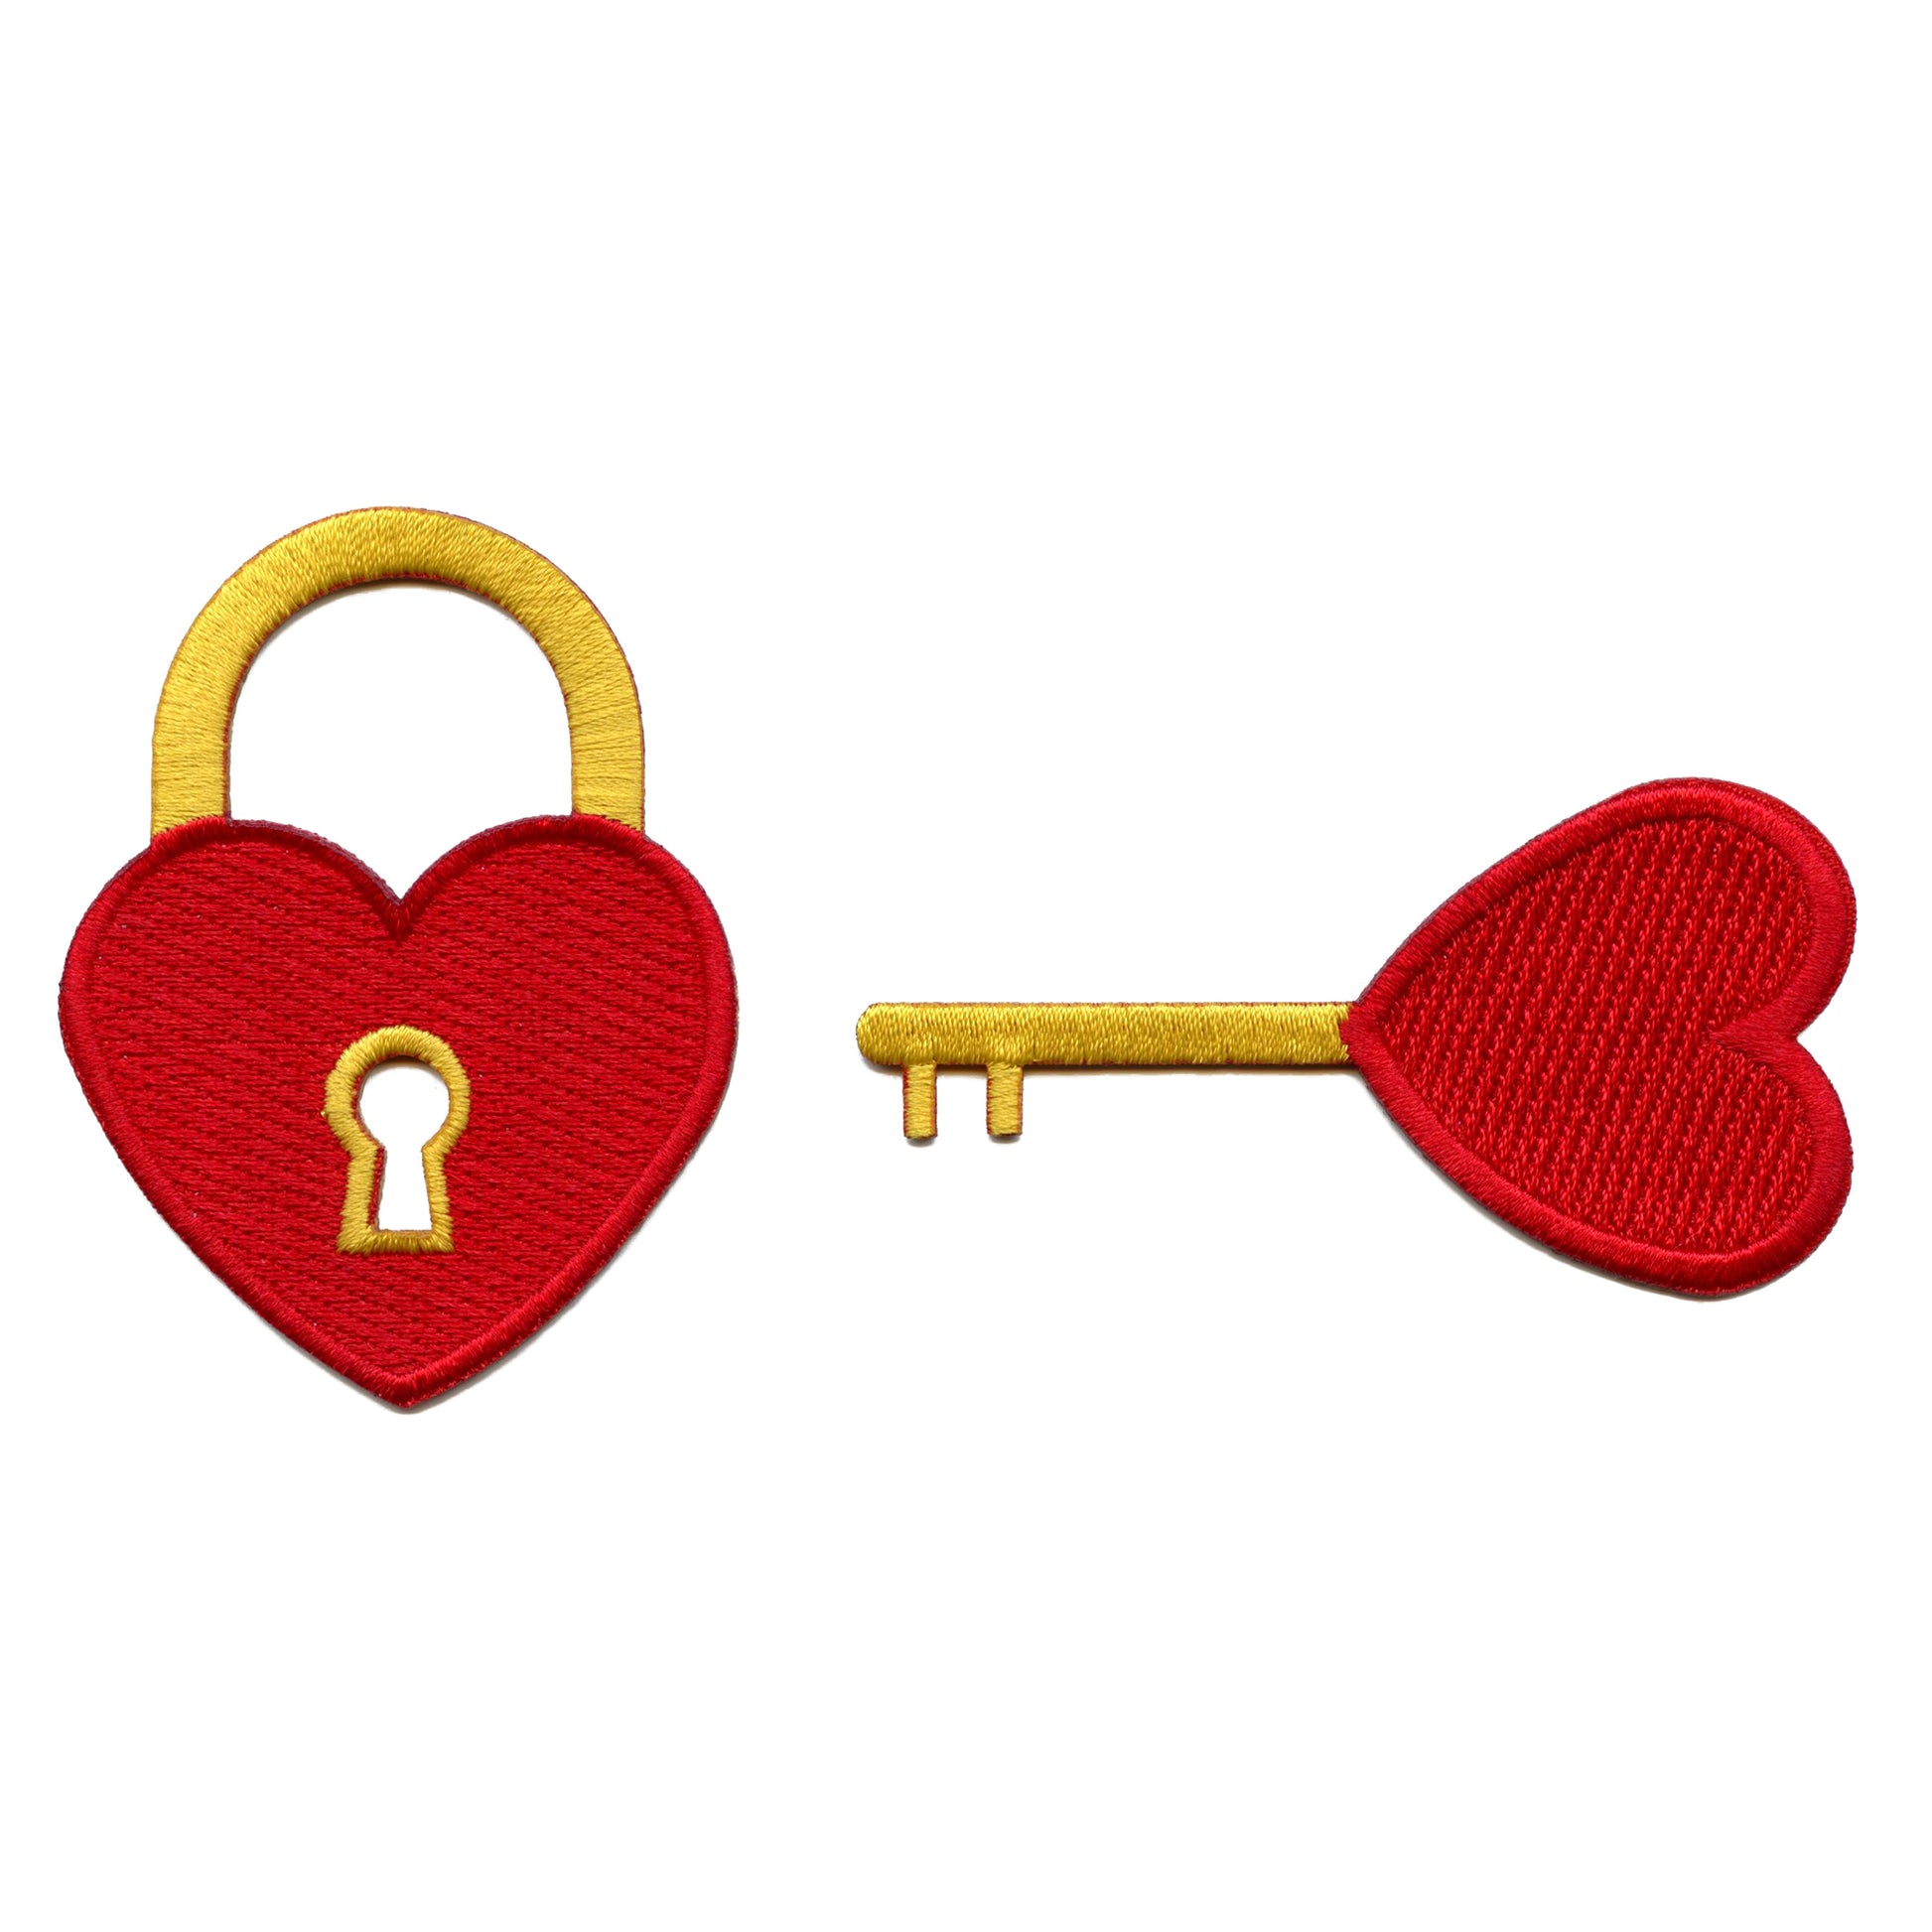 Key To My Heart Patch Set Lock and Key Embroidered Iron On 